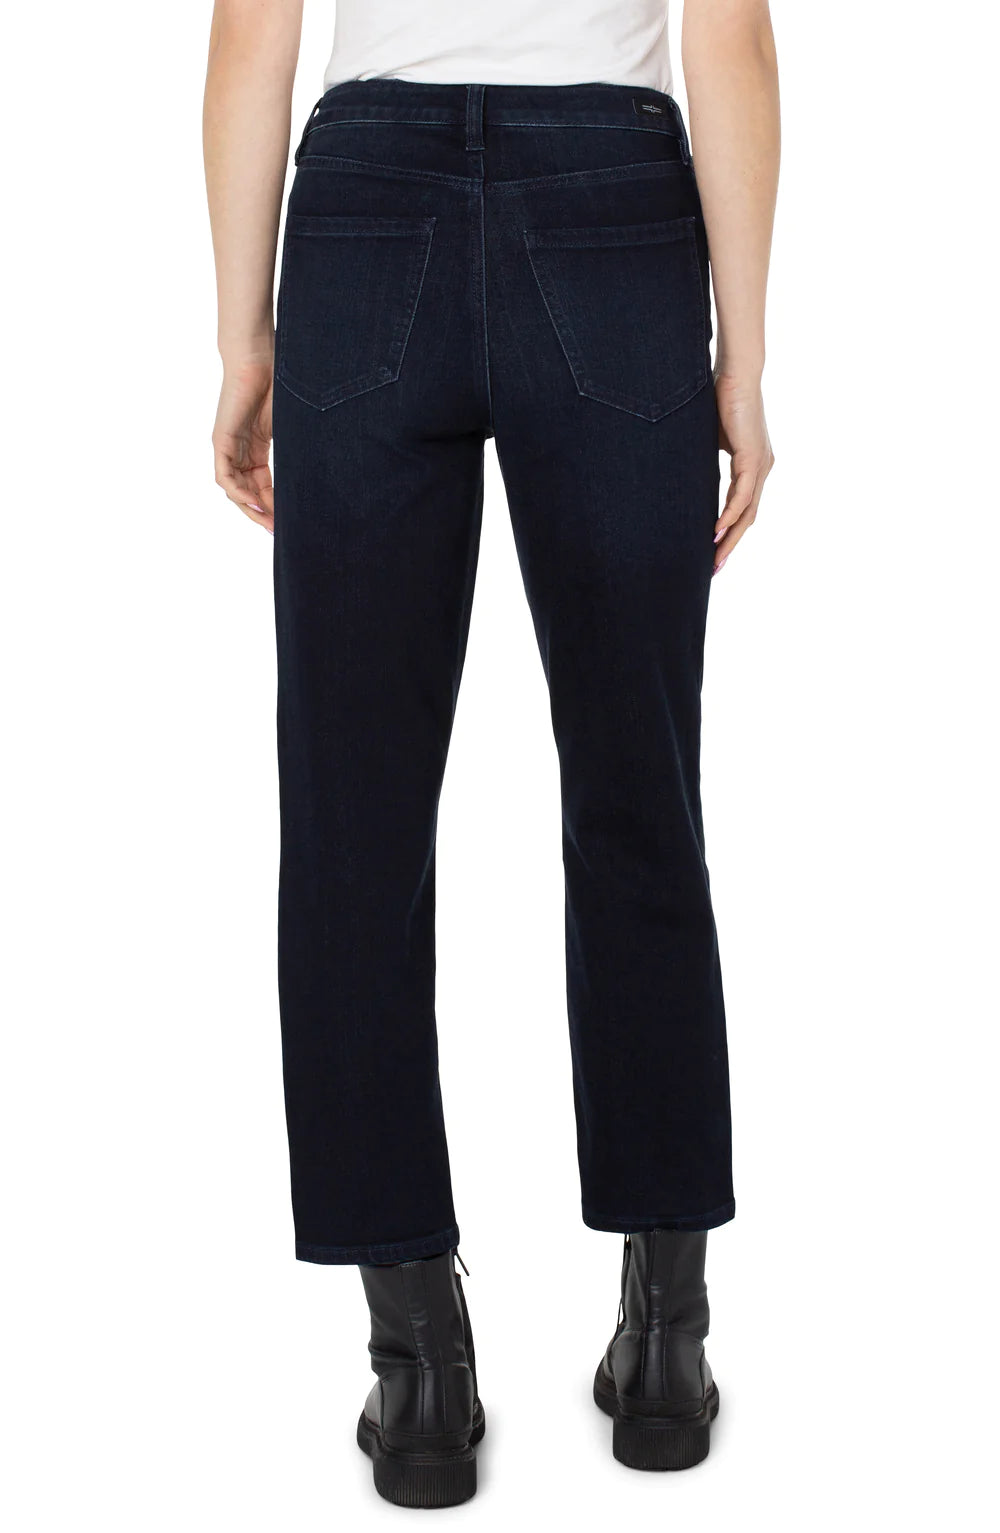 KENNEDY CROP HI-RISE WITH EXPOSED BUTTON FLY